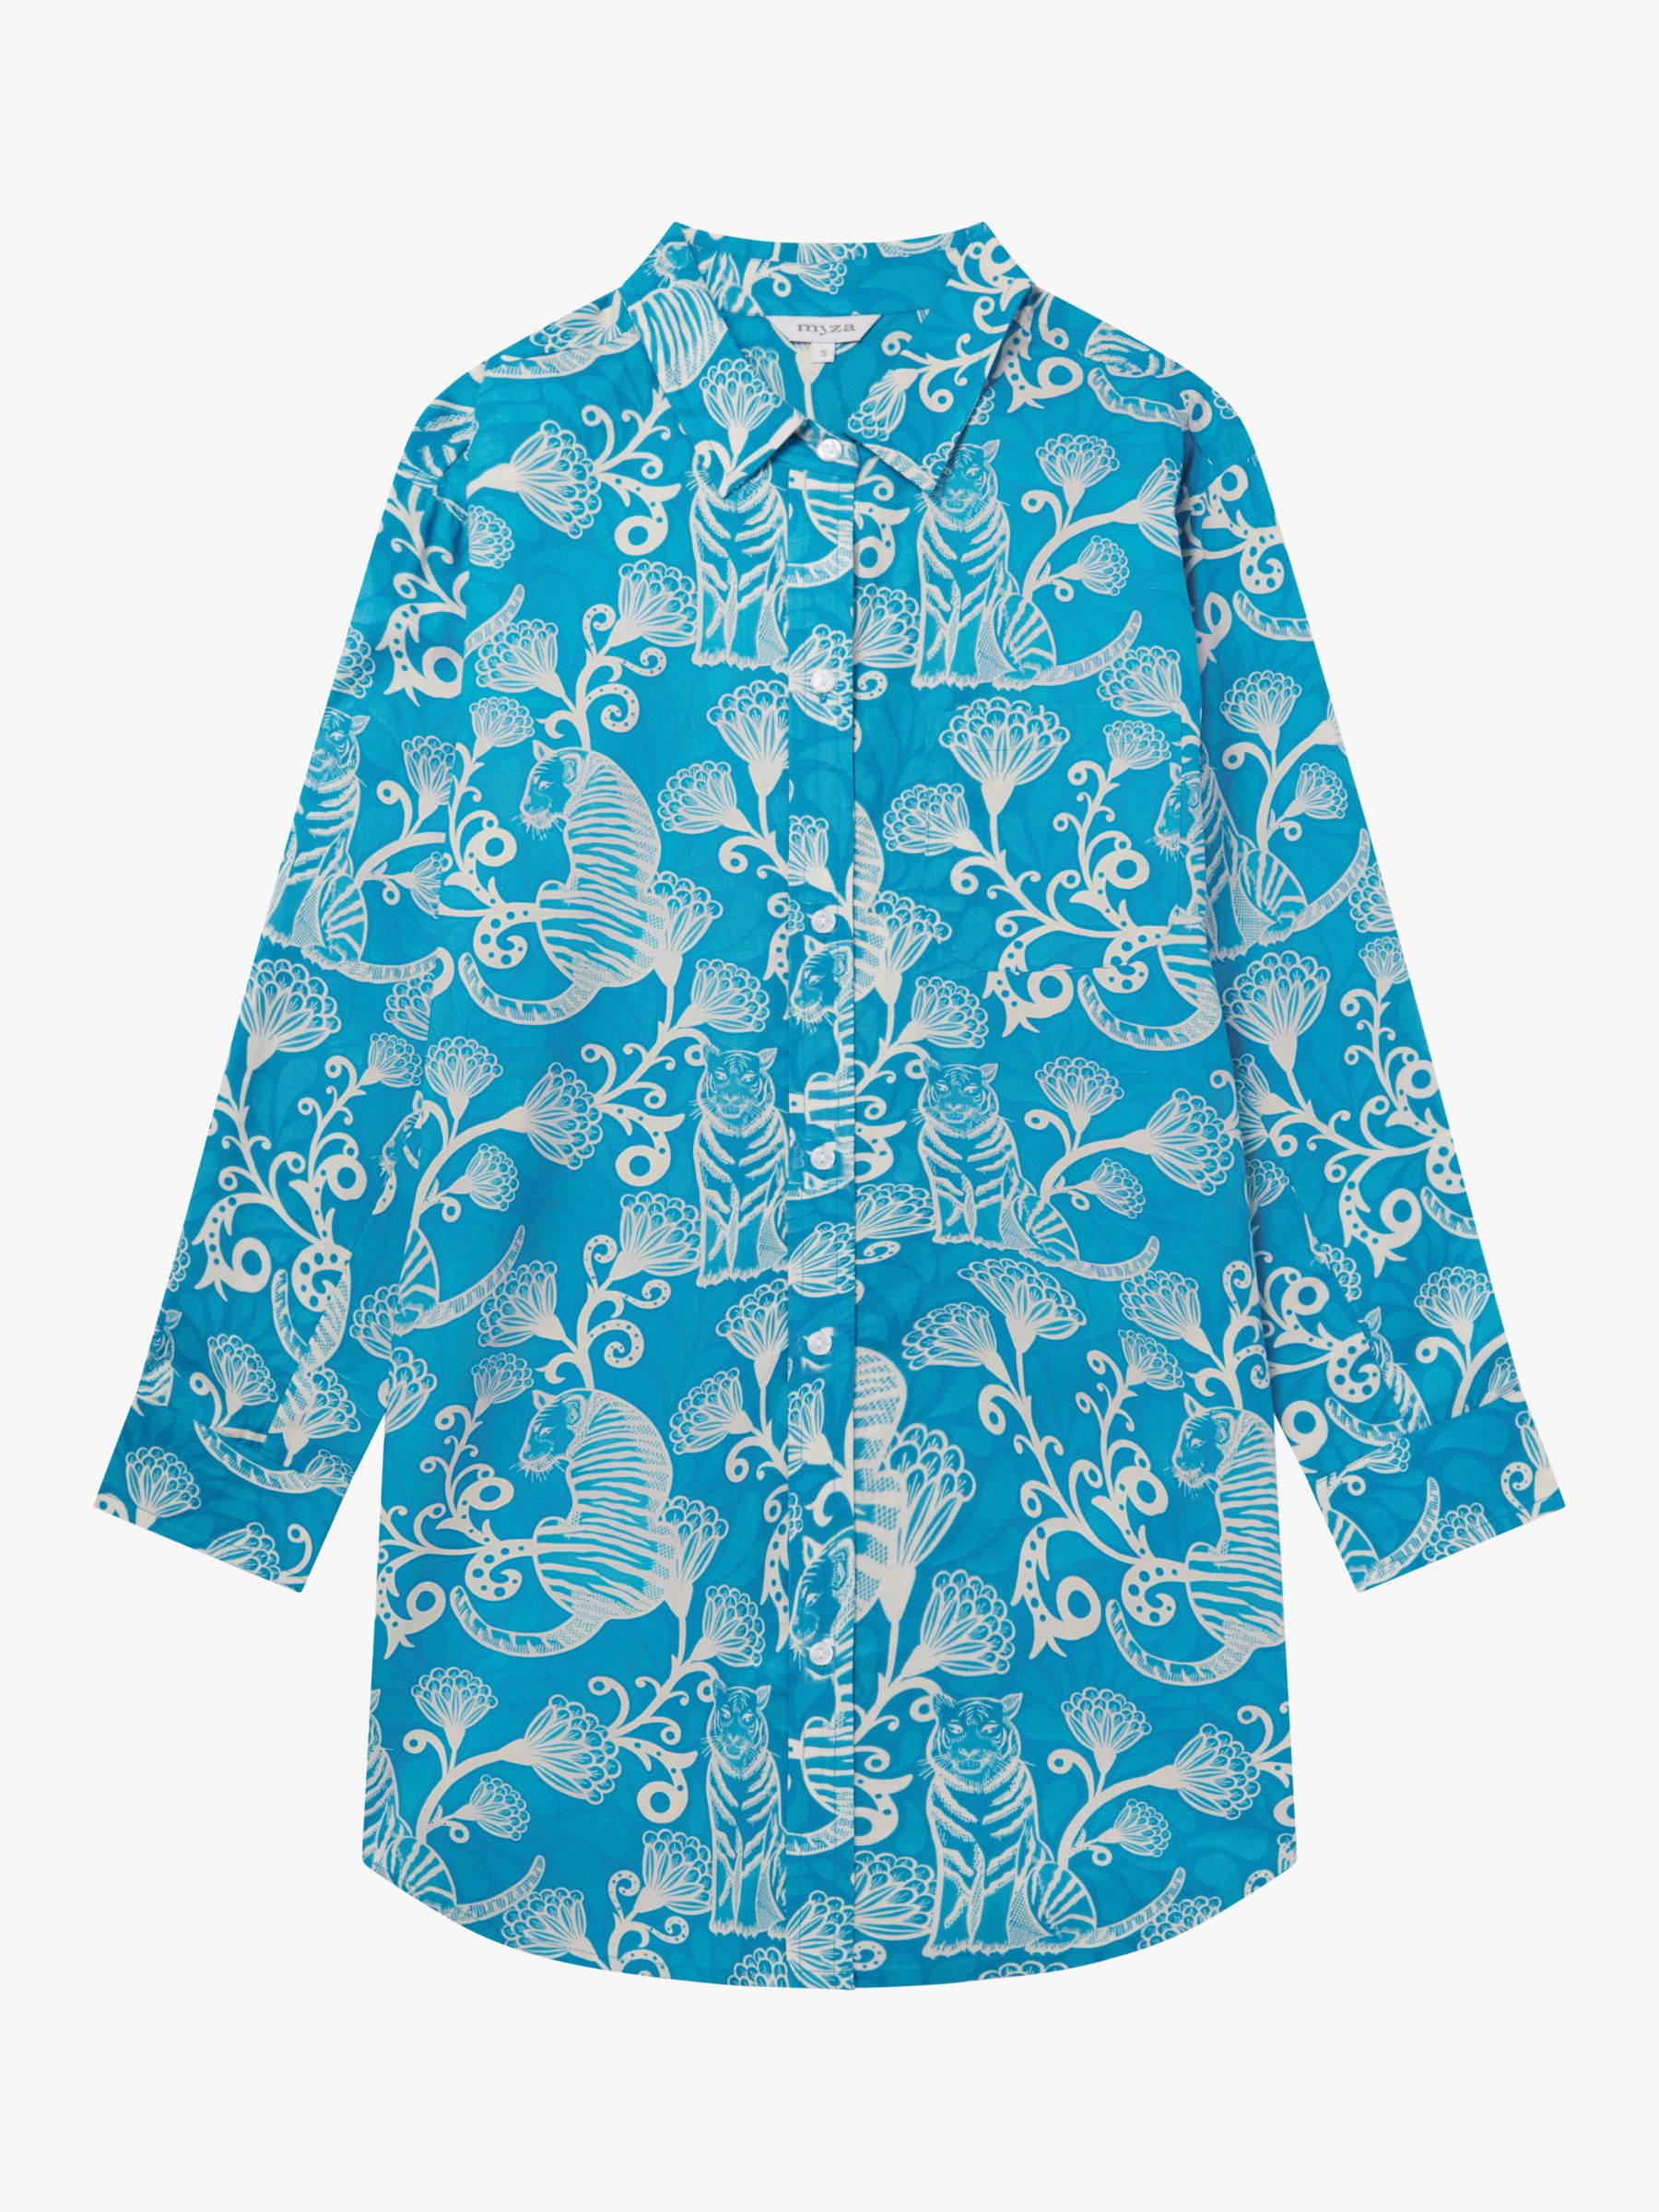 Buy myza Tiger and Floral Organic Cotton Nightshirt, Blue Online at johnlewis.com